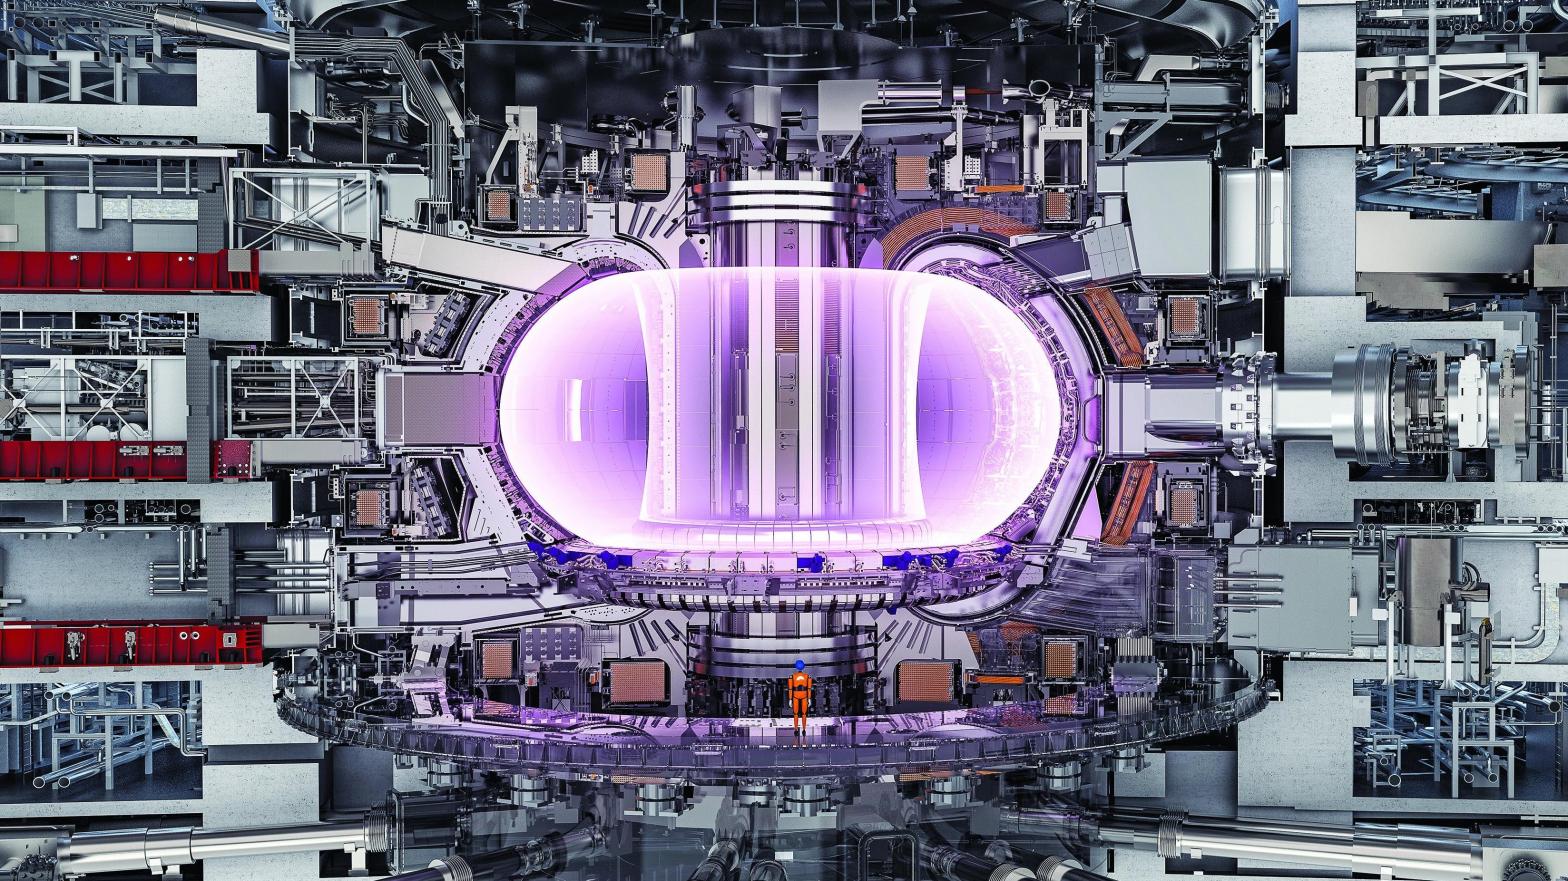 We’ll Have to Wait a Bit Longer for the World’s Biggest Fusion Reactor